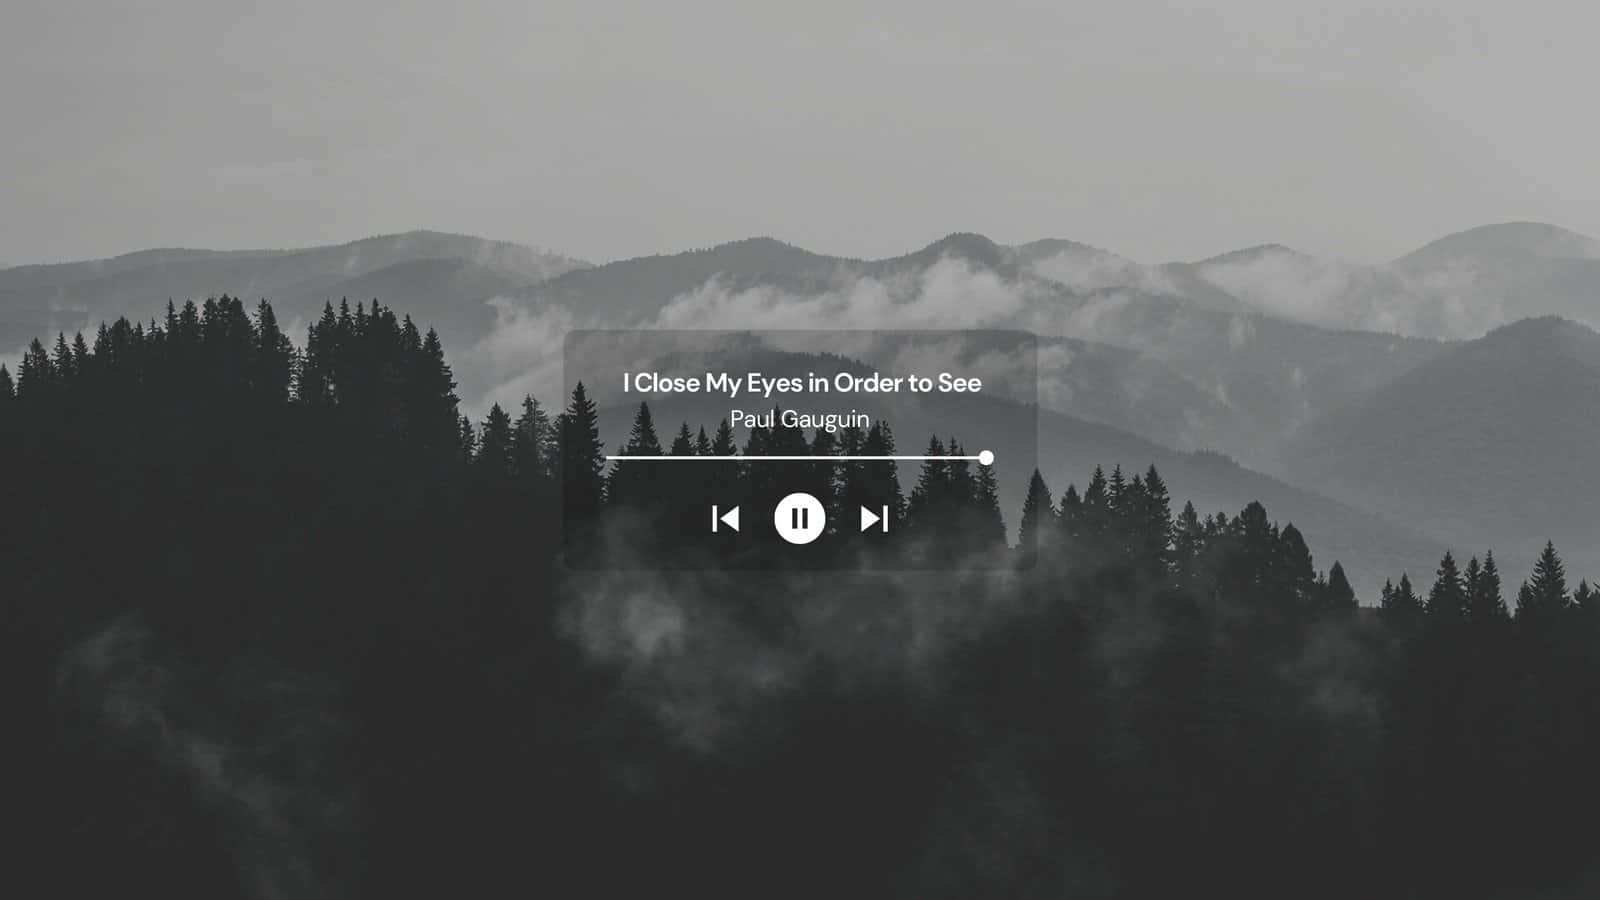 A minimalistic aesthetic gray background